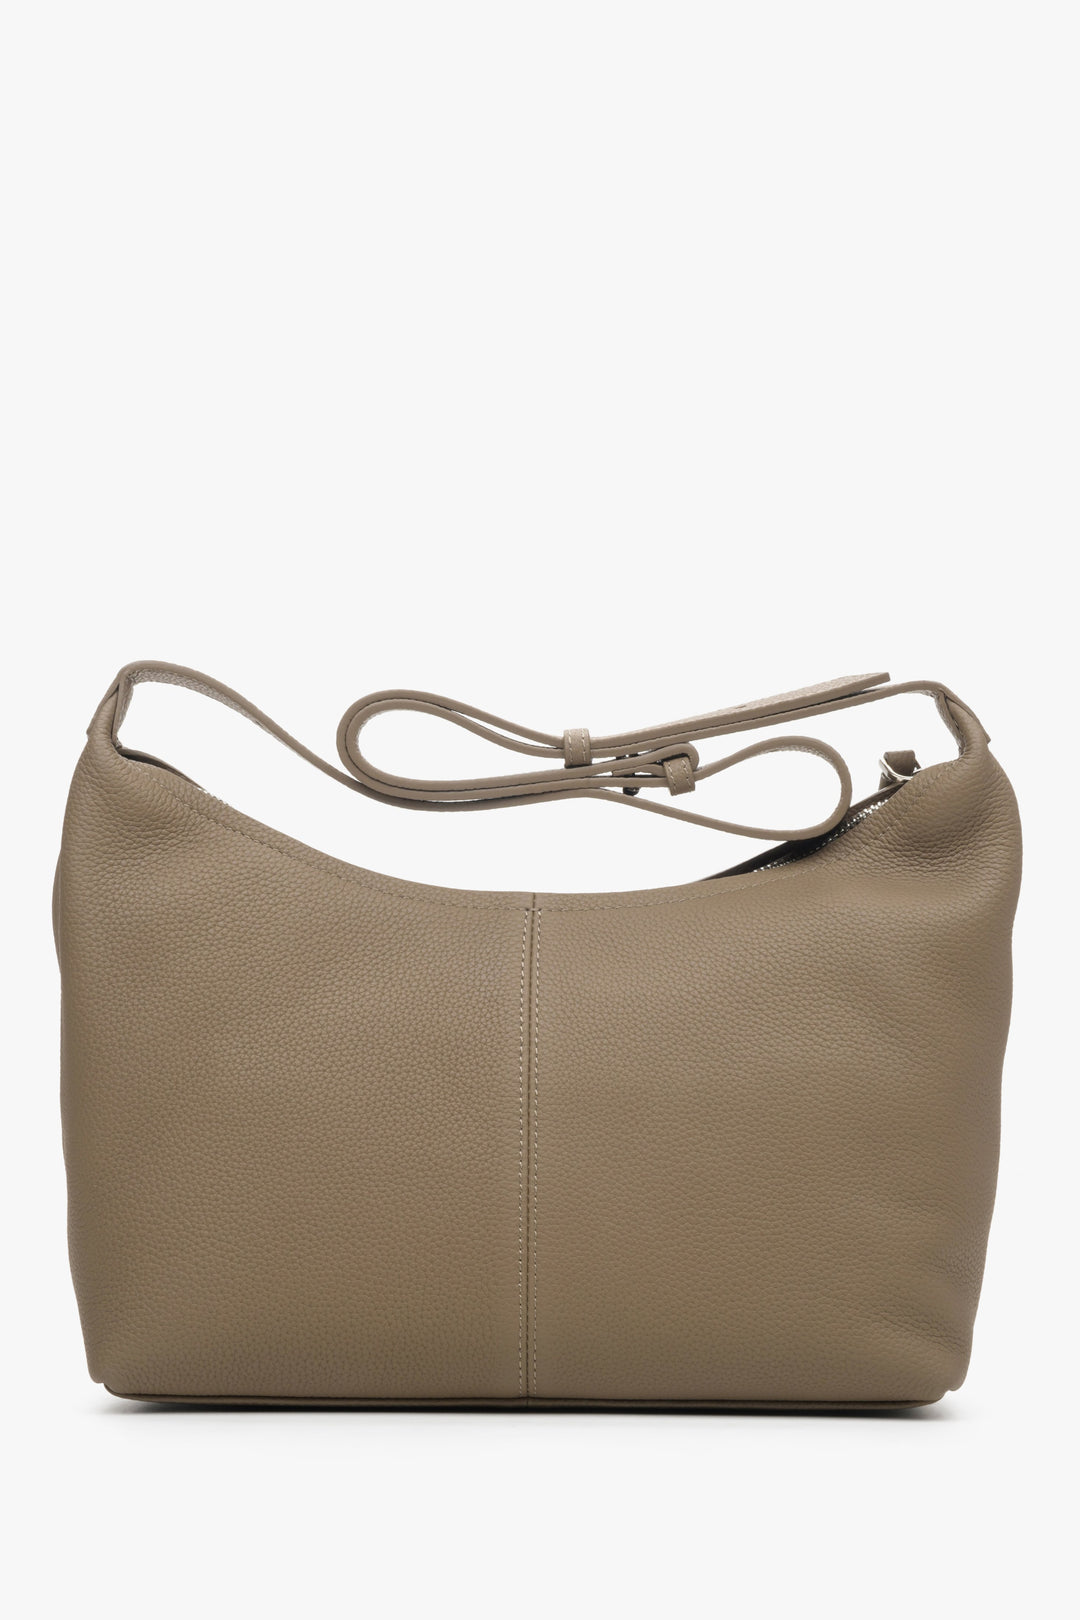 Women's grey-brown shoulder bag made of genuine leather by Estro - back view of the model.